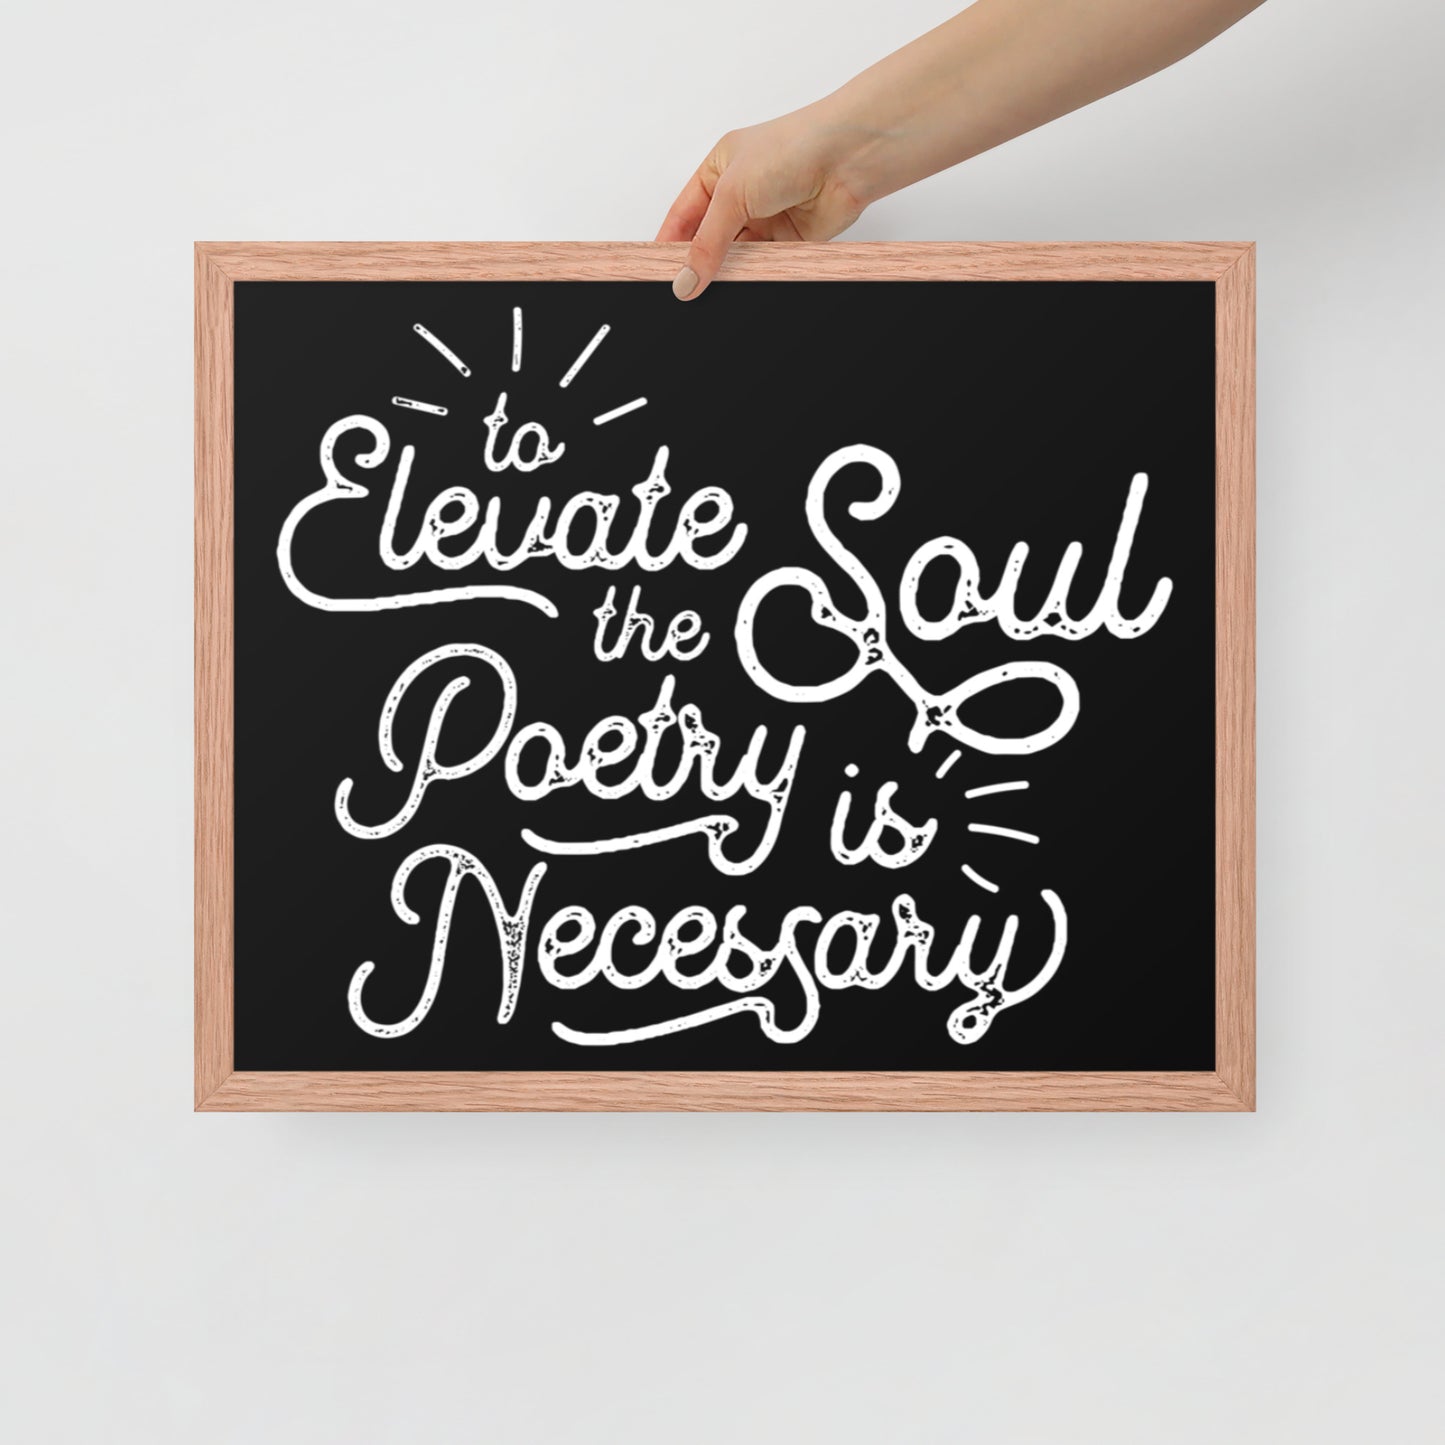 To Elevate the Soul Poetry is Necessary Framed Poster - 16 x 20 Red Oak Frame